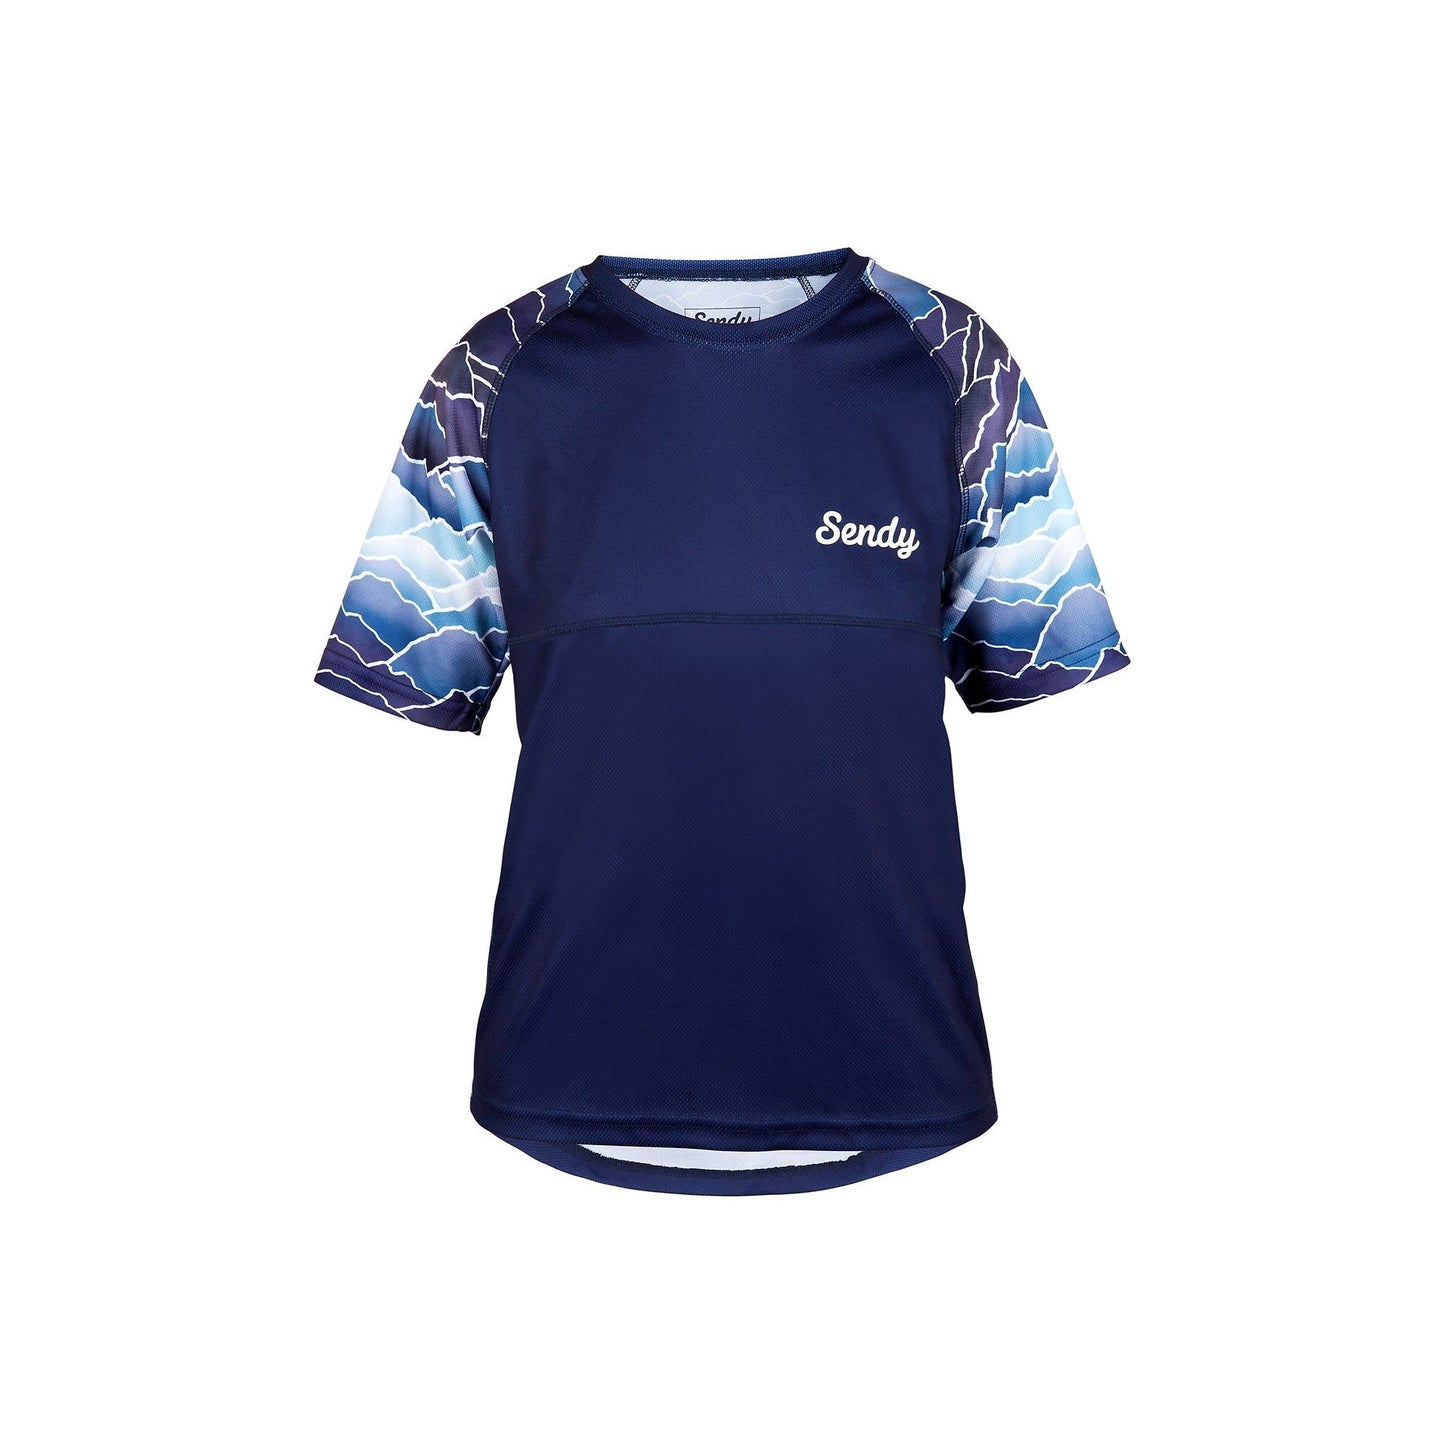 Sendy Send It Short Sleeve Youth Jersey - Youth L - Peaky